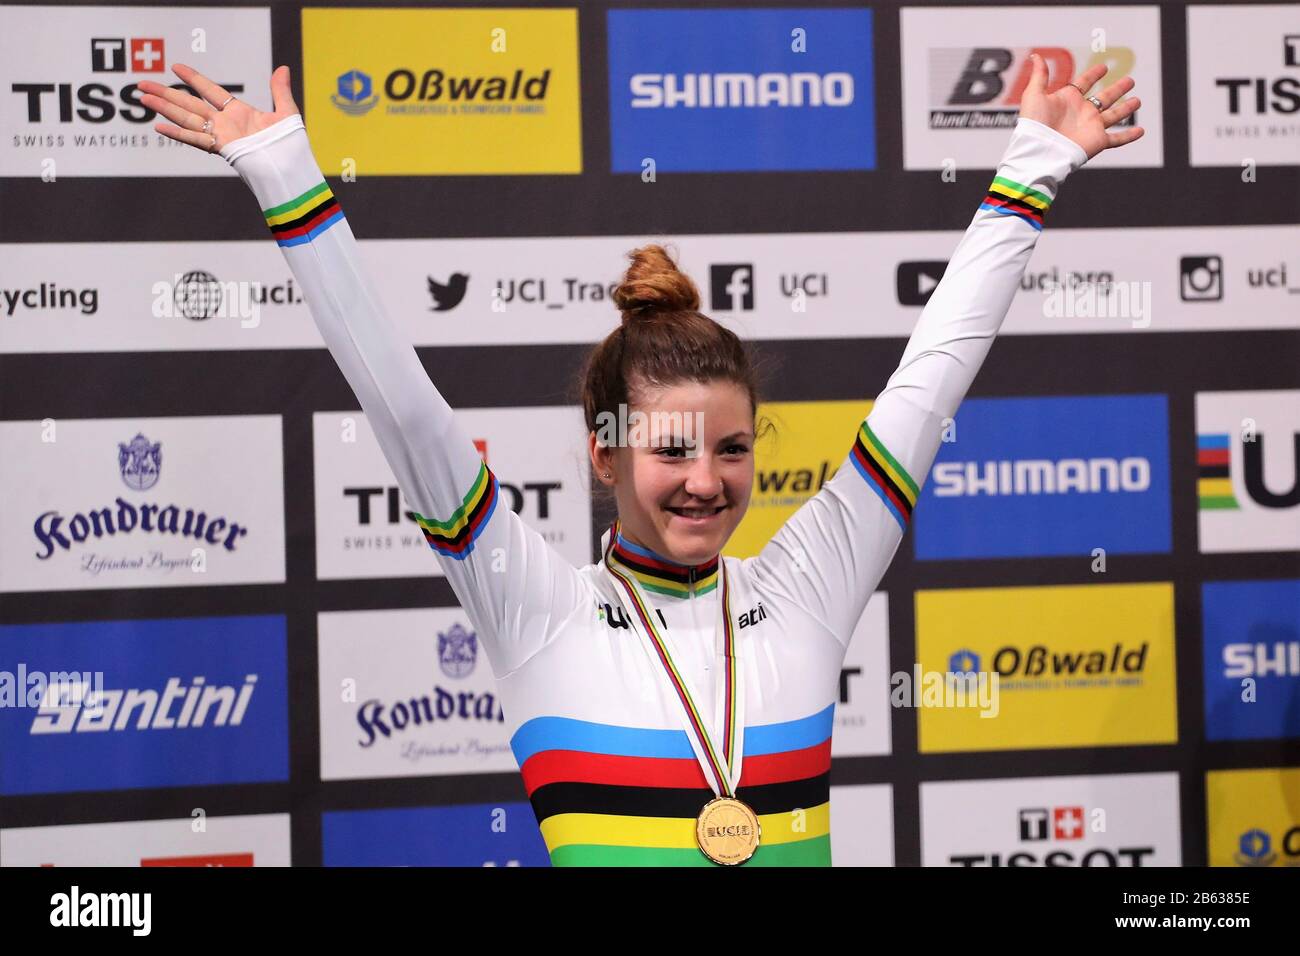 Chloe Dygert Of Usa Womens Individual Pursuit Podium During The 2020 Uci Track Cycling World 3346